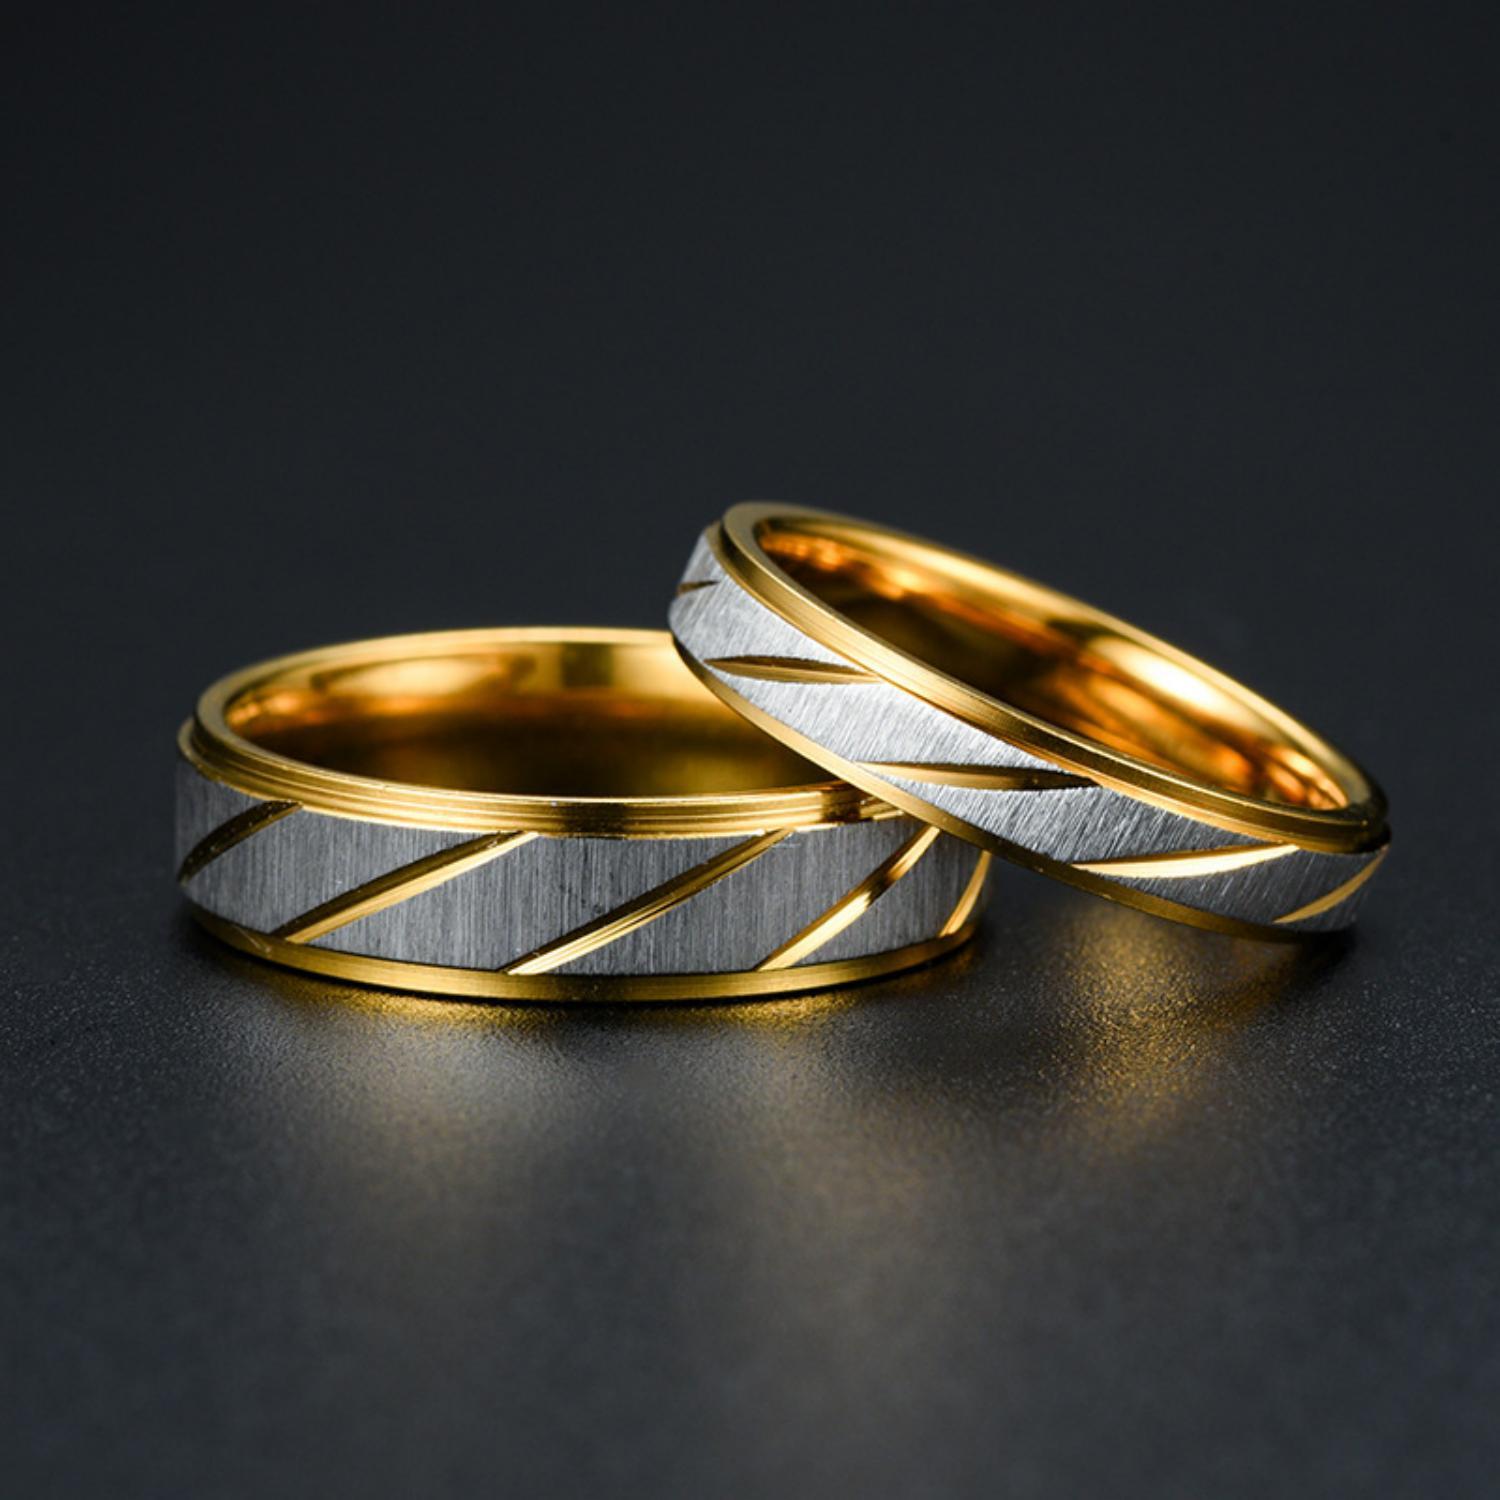 Personalized Matching Rings For Couples In Titanium - CoupleSets